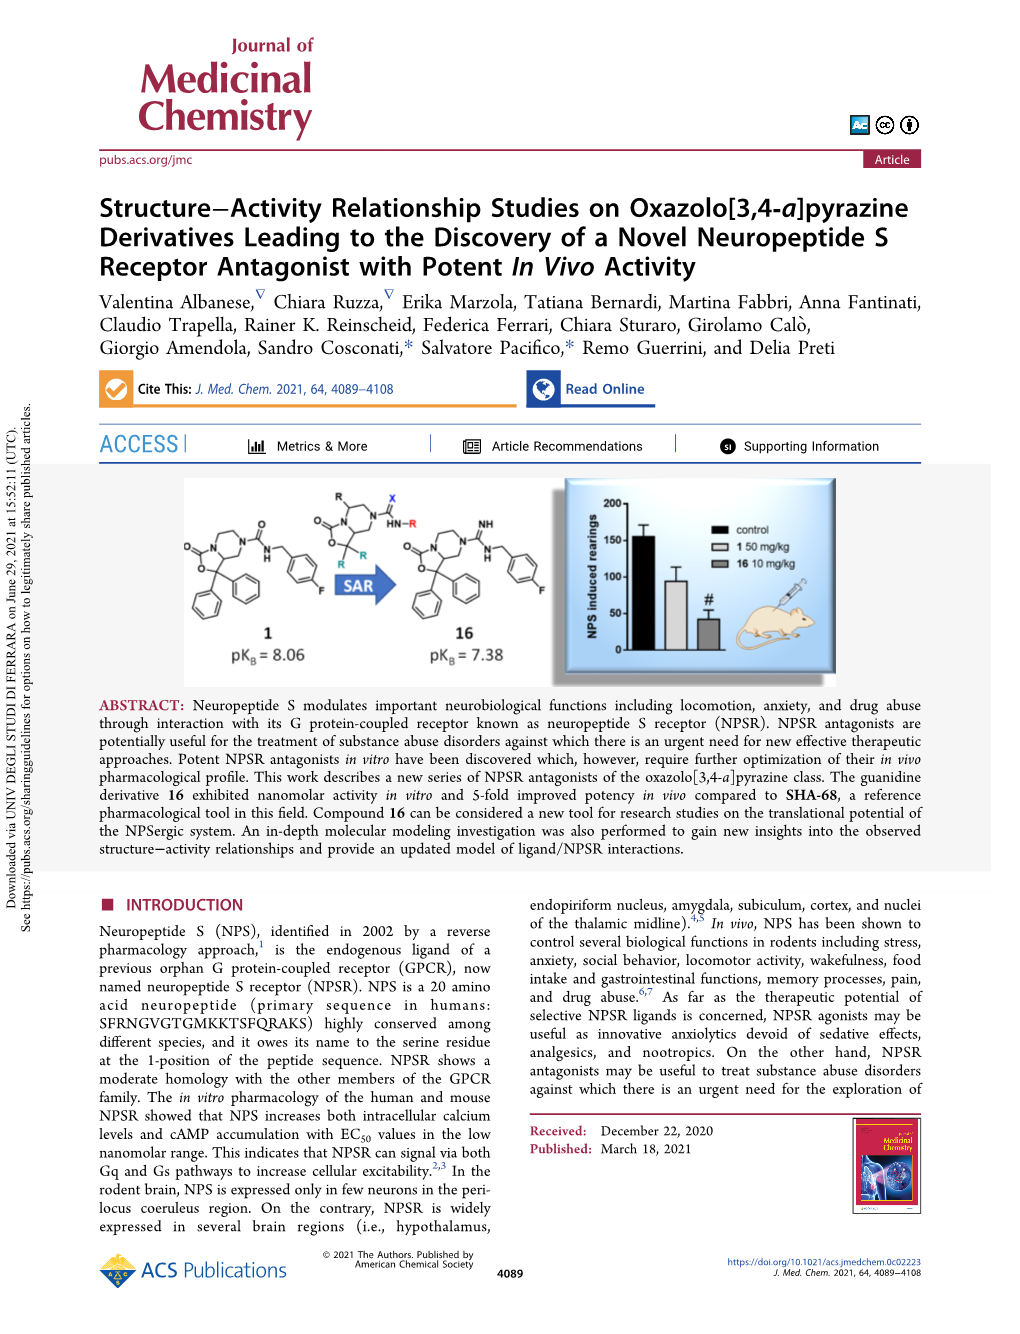 Structure–Activity Relationship Studies on Oxazolo[3,4-A]Pyrazine Derivatives Leading to the Discovery of a Novel Neuropeptide